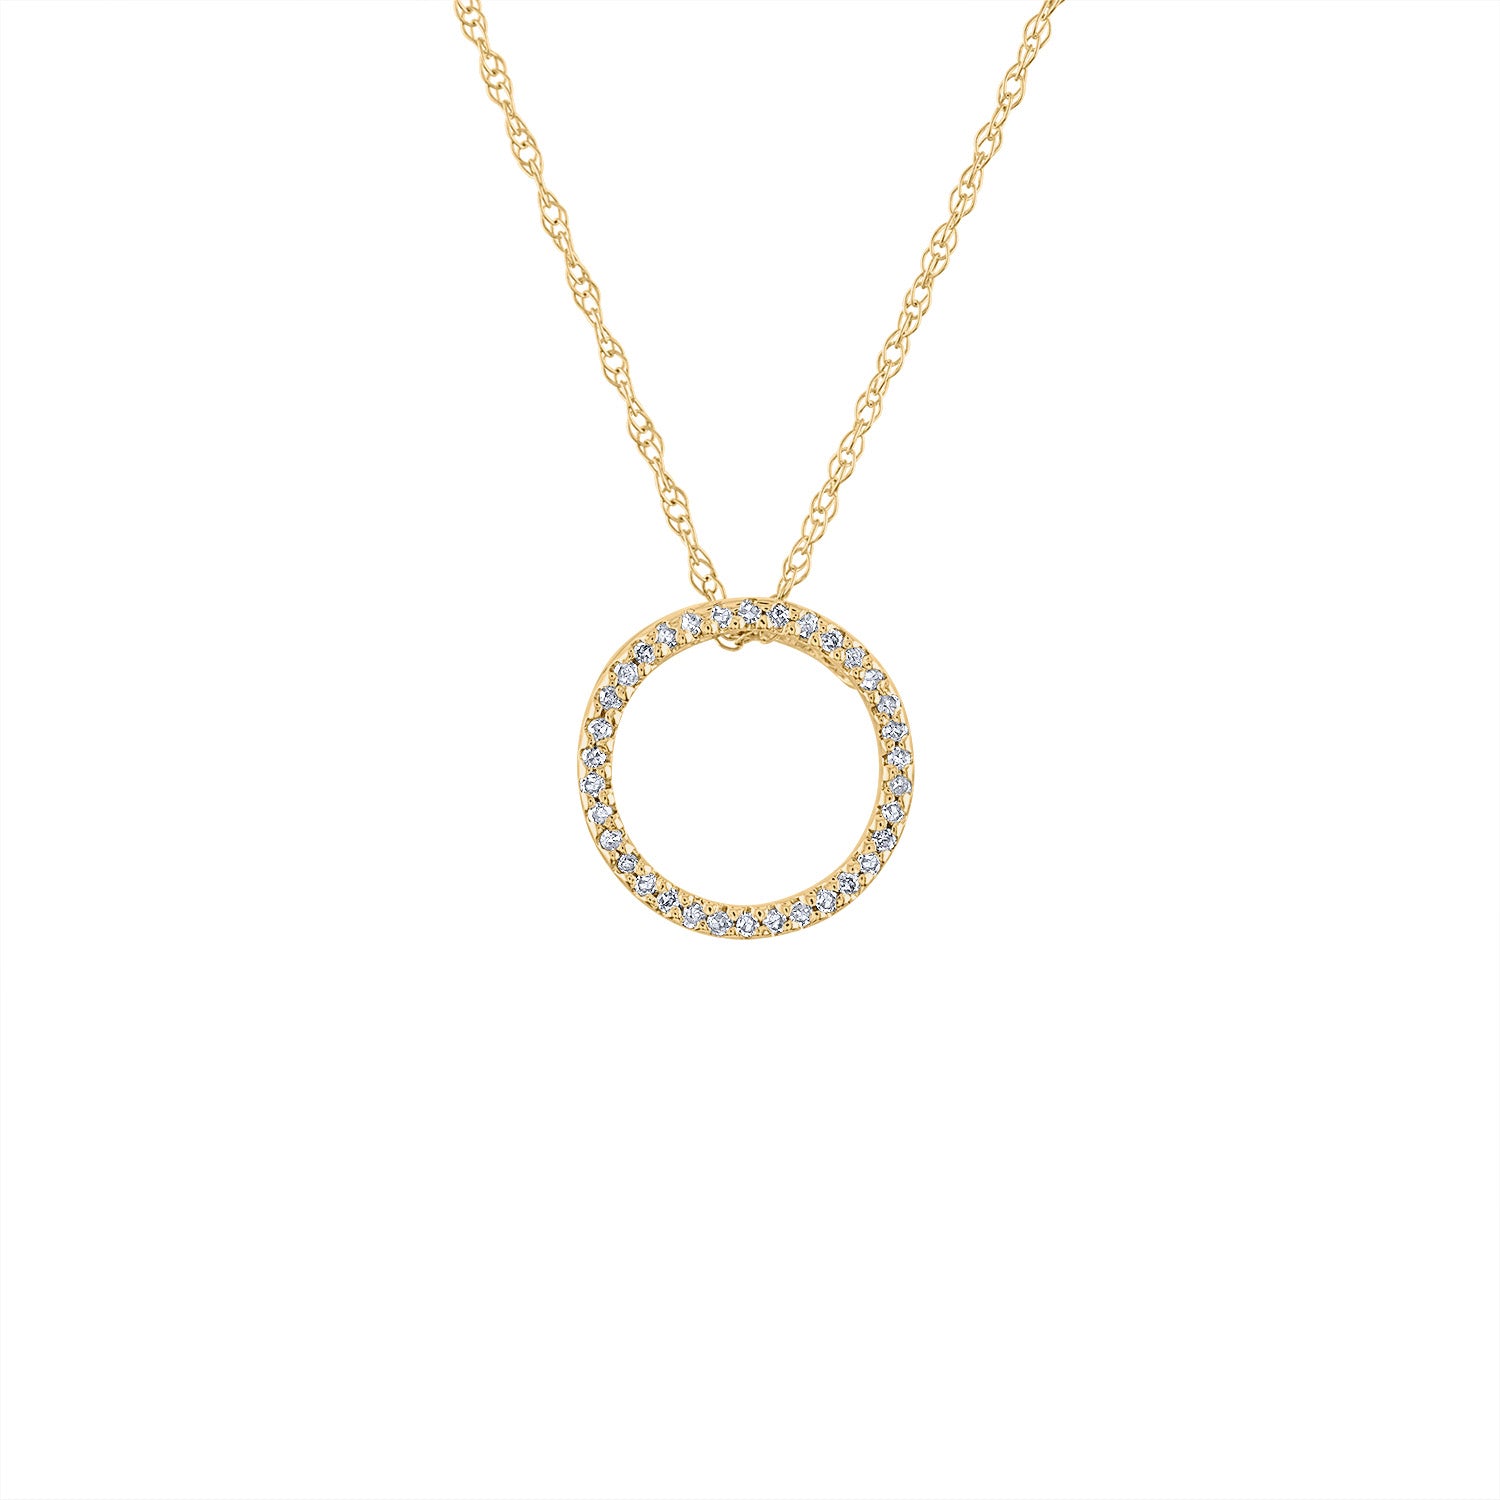 14KT GOLD SMALL DIAMOND OPEN CIRCLE NECKLACE